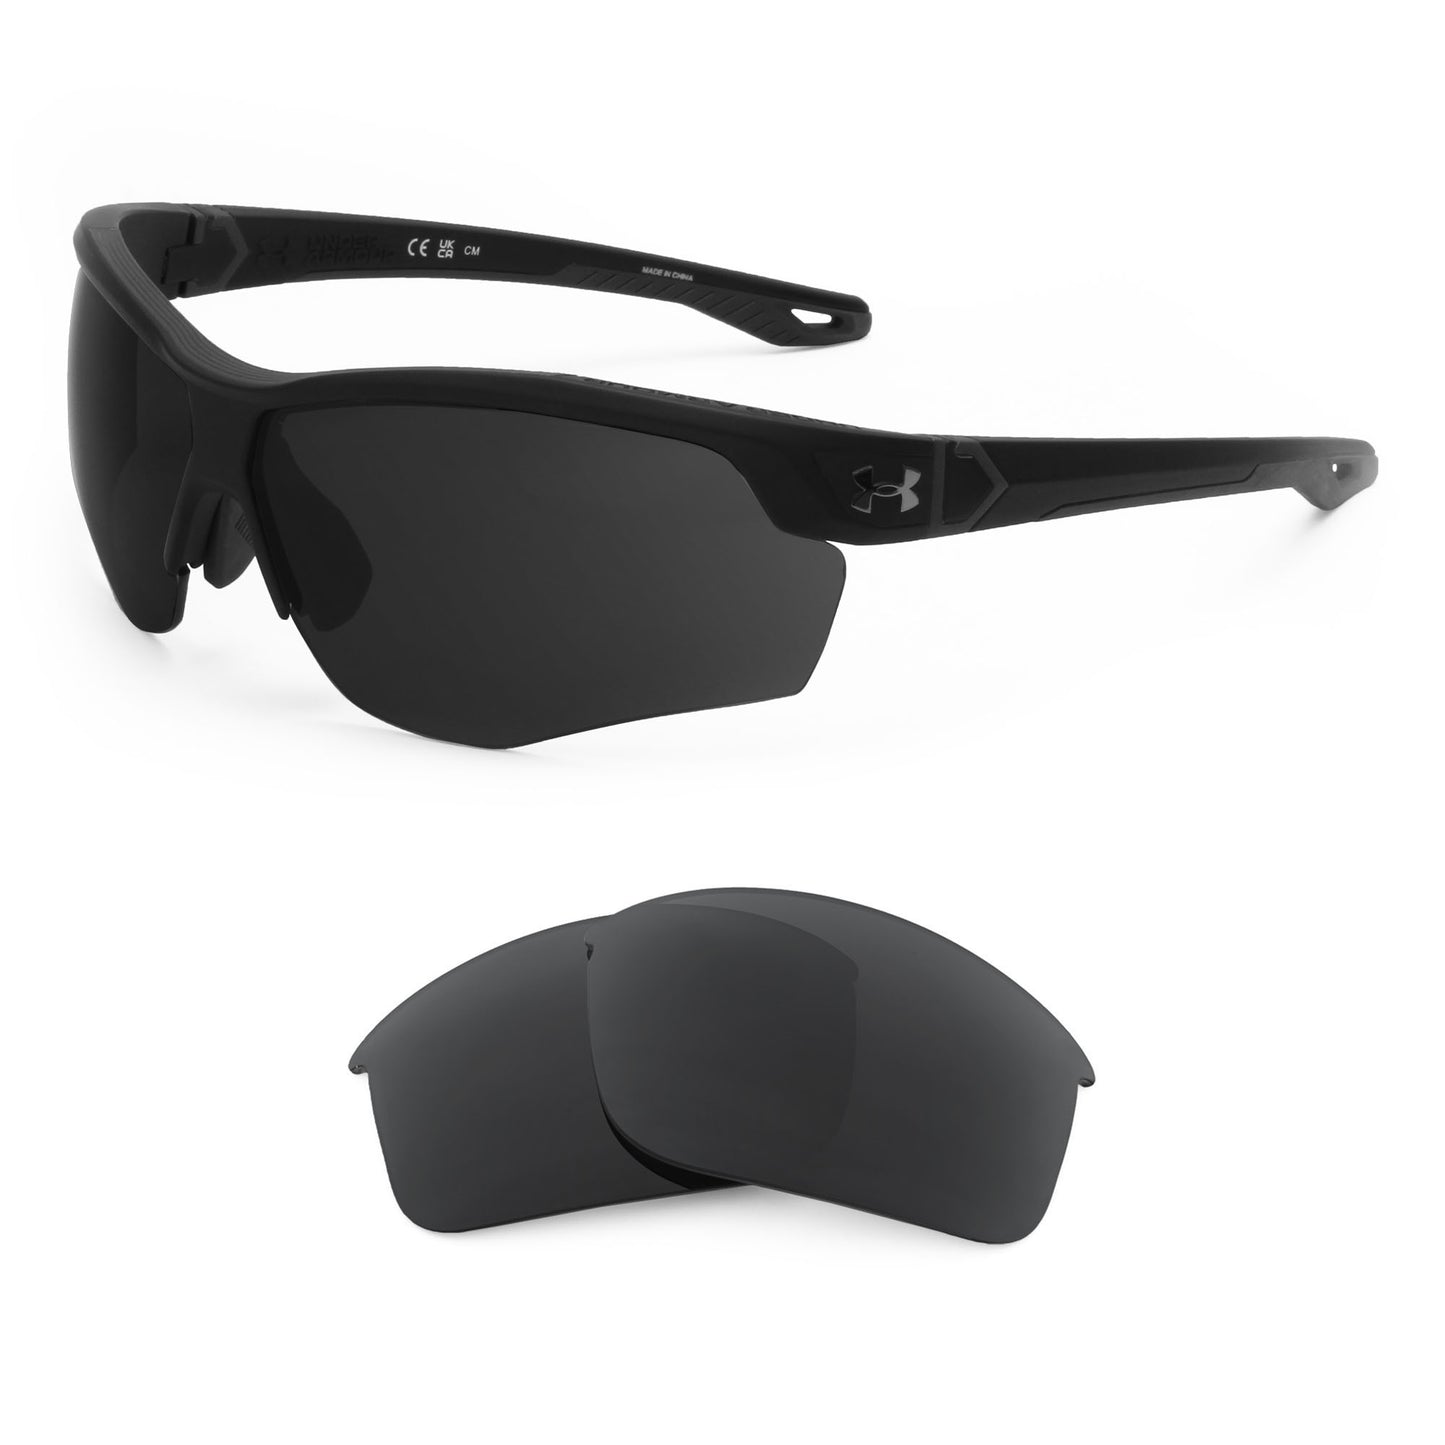 Under Armour Yard Dual sunglasses with replacement lenses